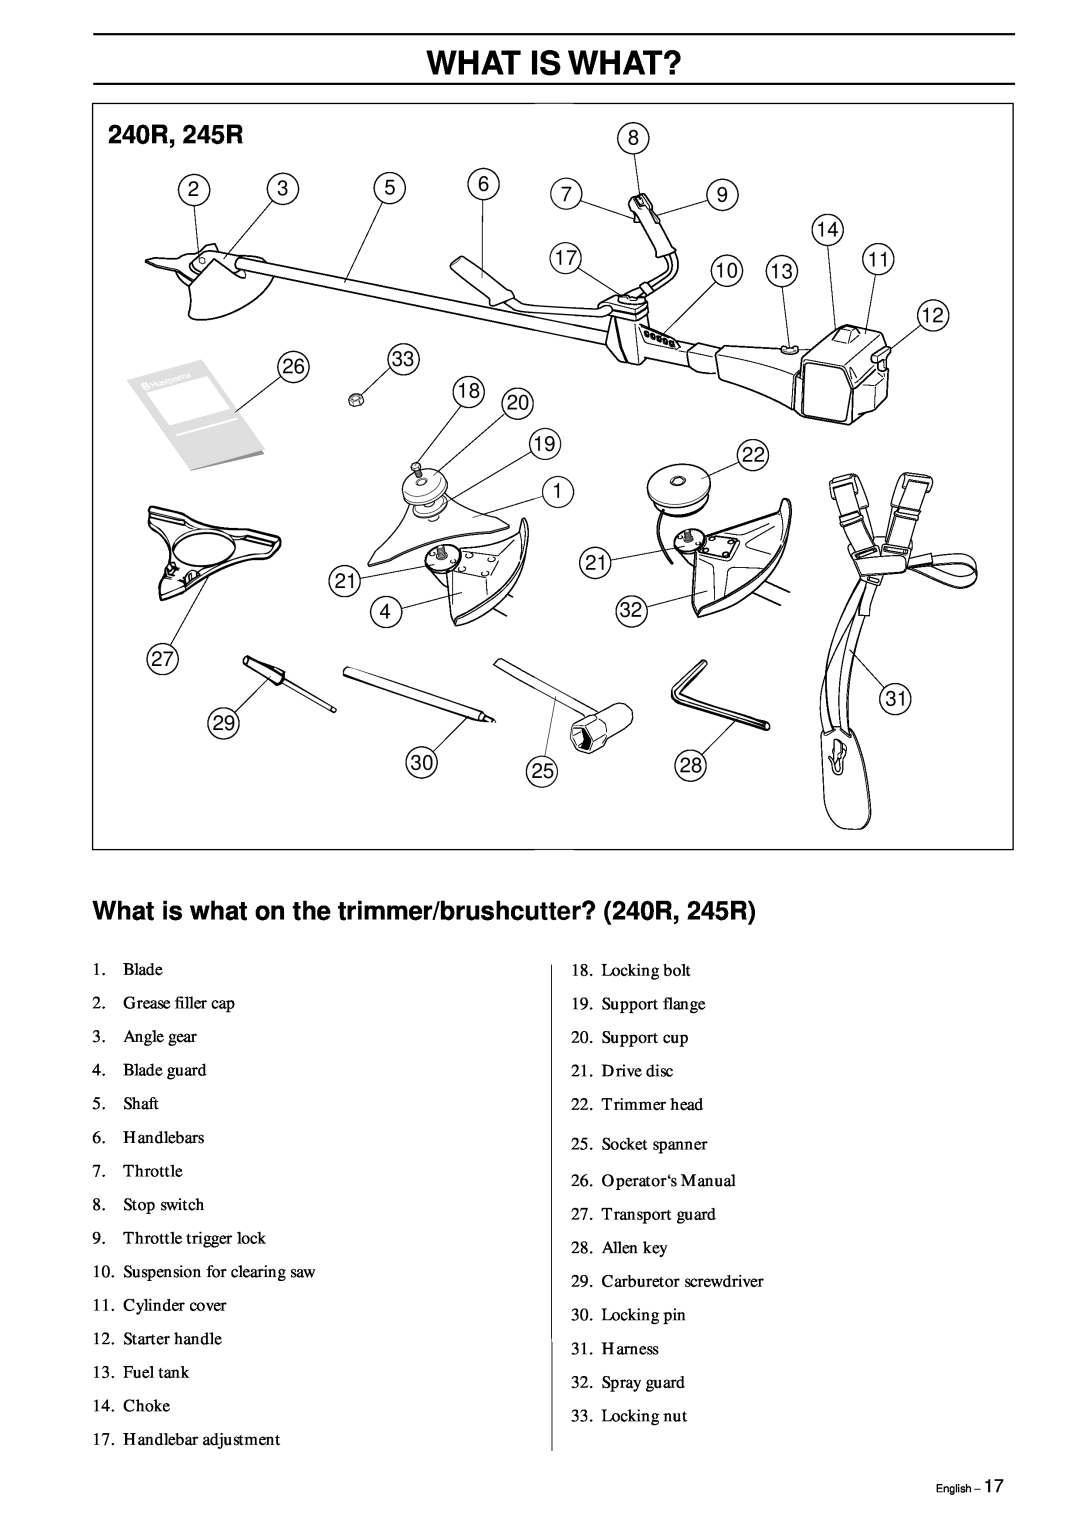 Husqvarna 245 RX, 245R/RX manual What Is What?, What is what on the trimmer/brushcutter? 240R, 245R 